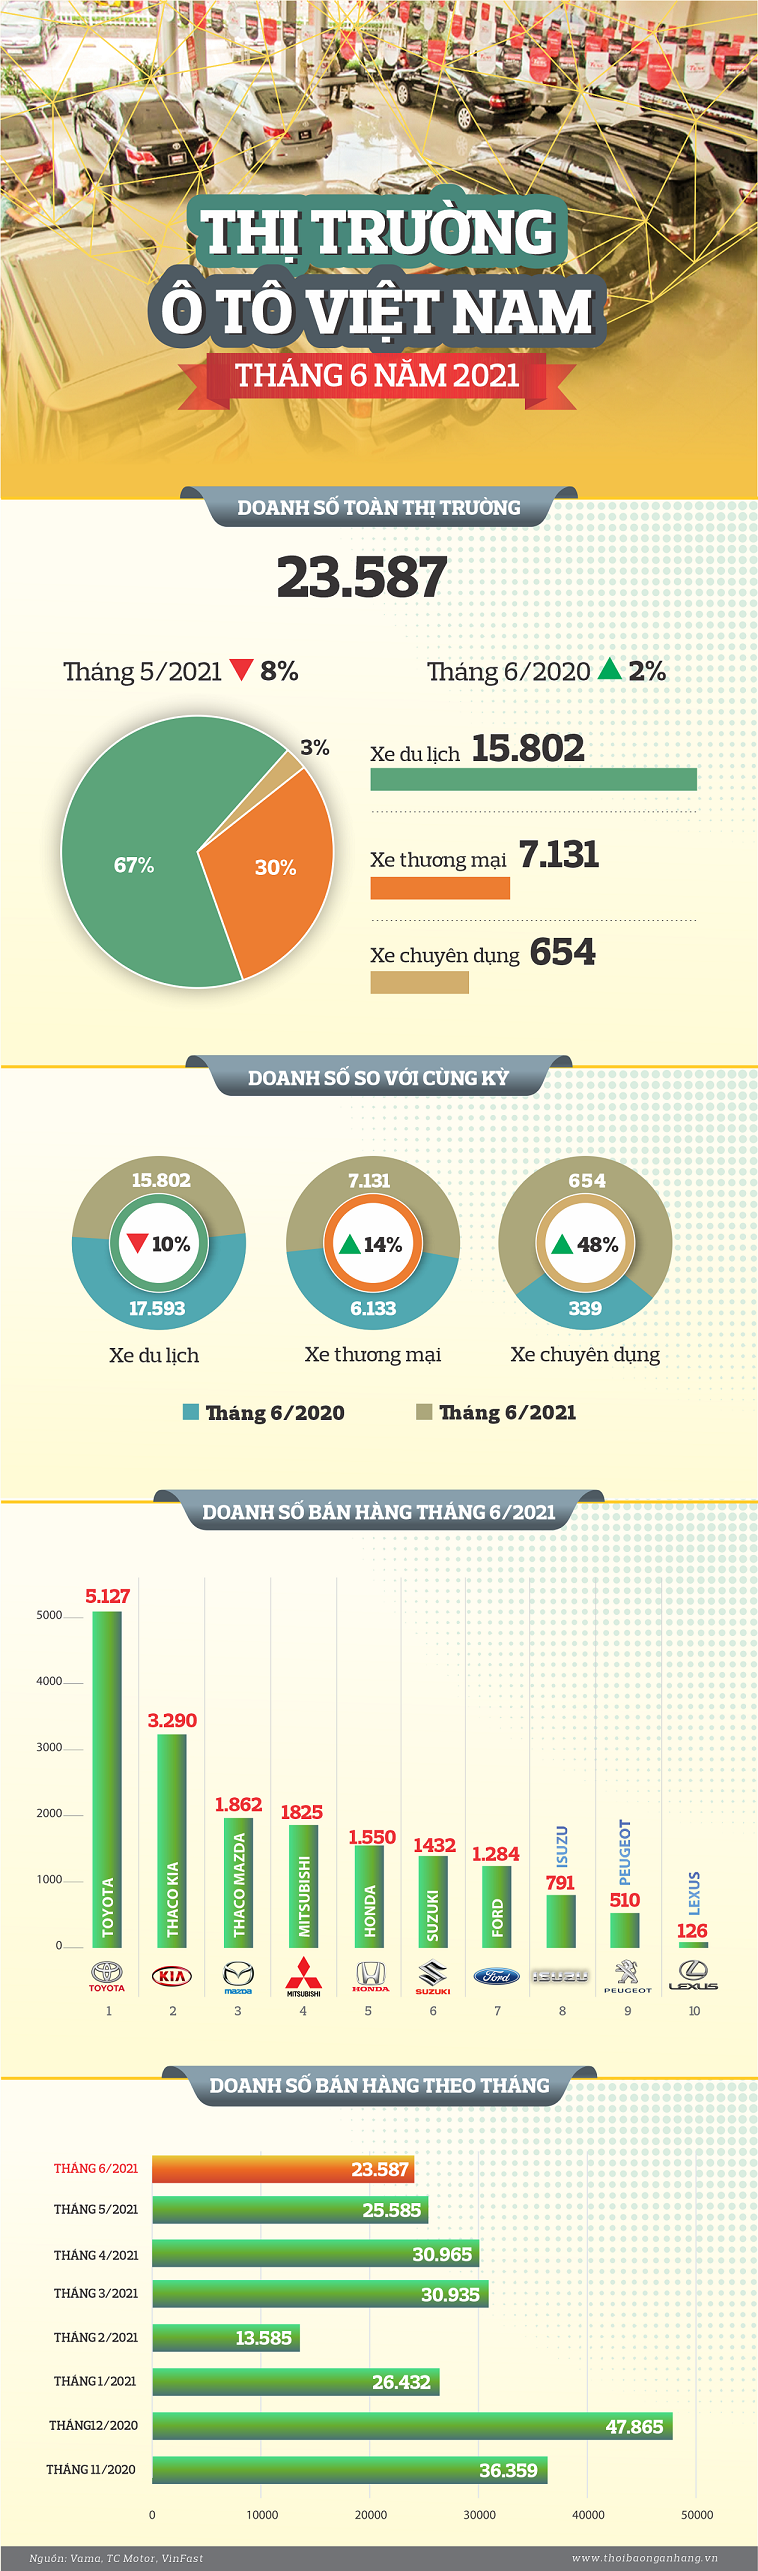 infographic thi truong o to thang 62021